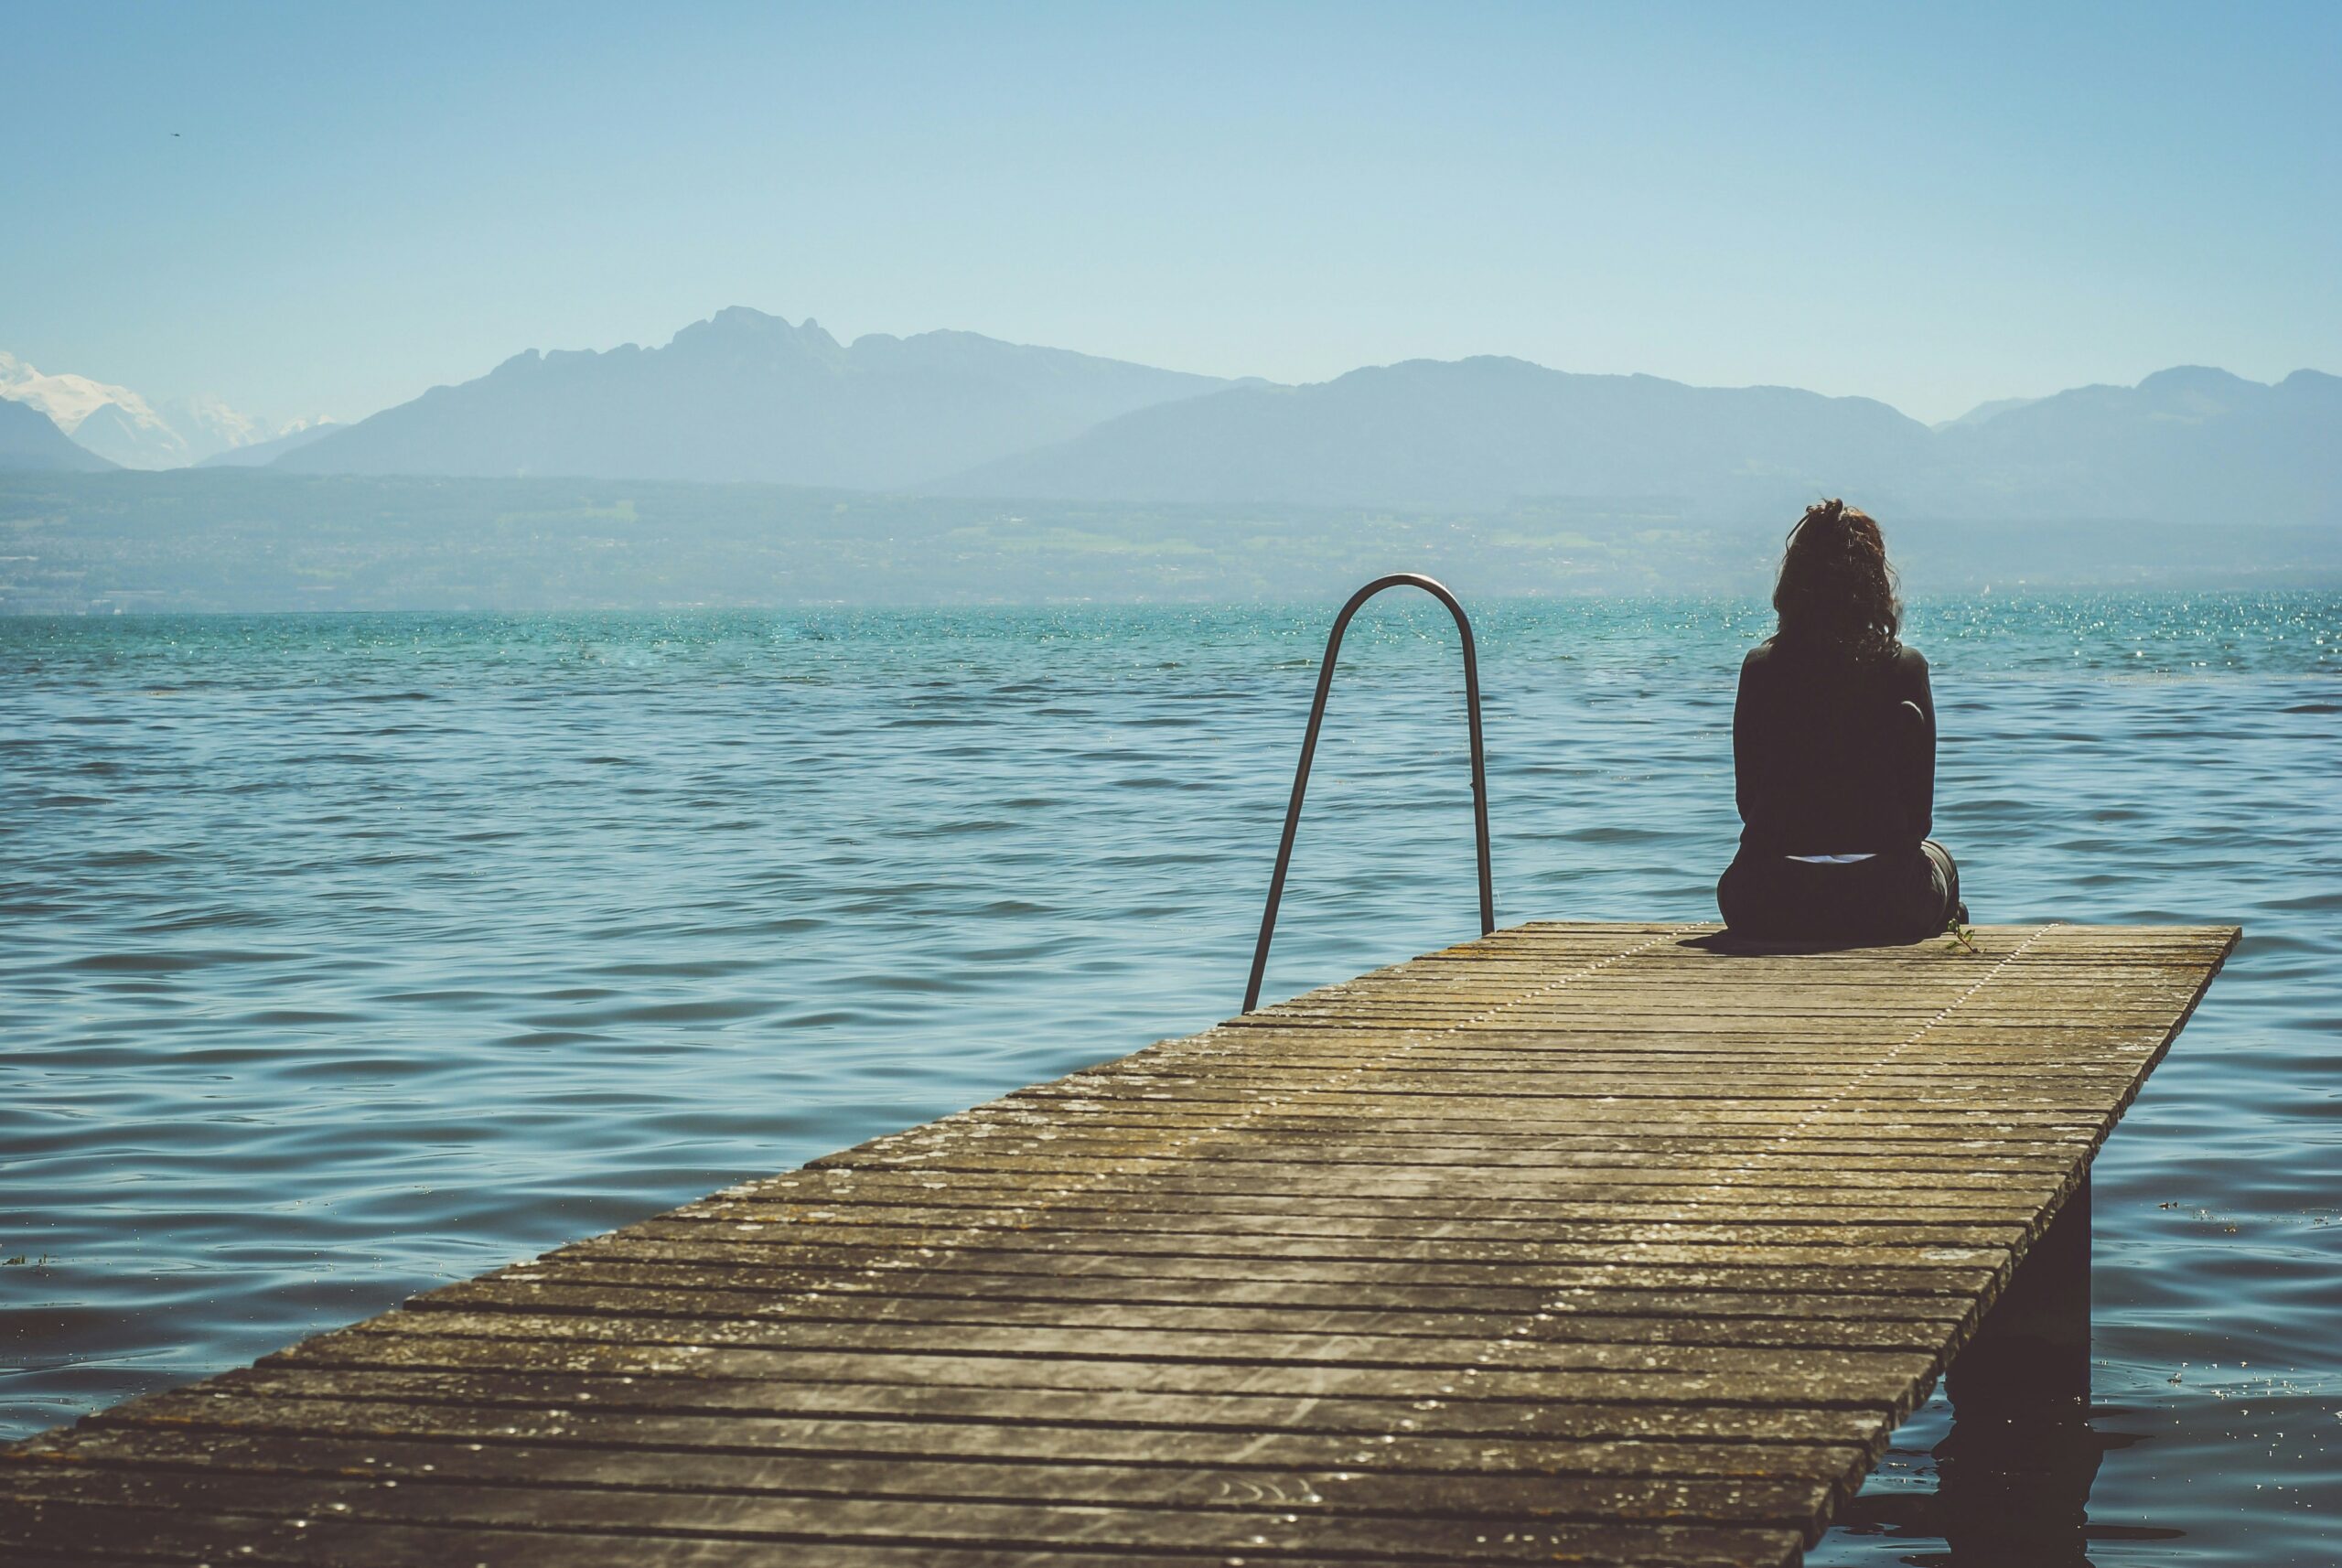 Image of a woman's back sitting on the end of a pier. The image has a lonely feel to it.